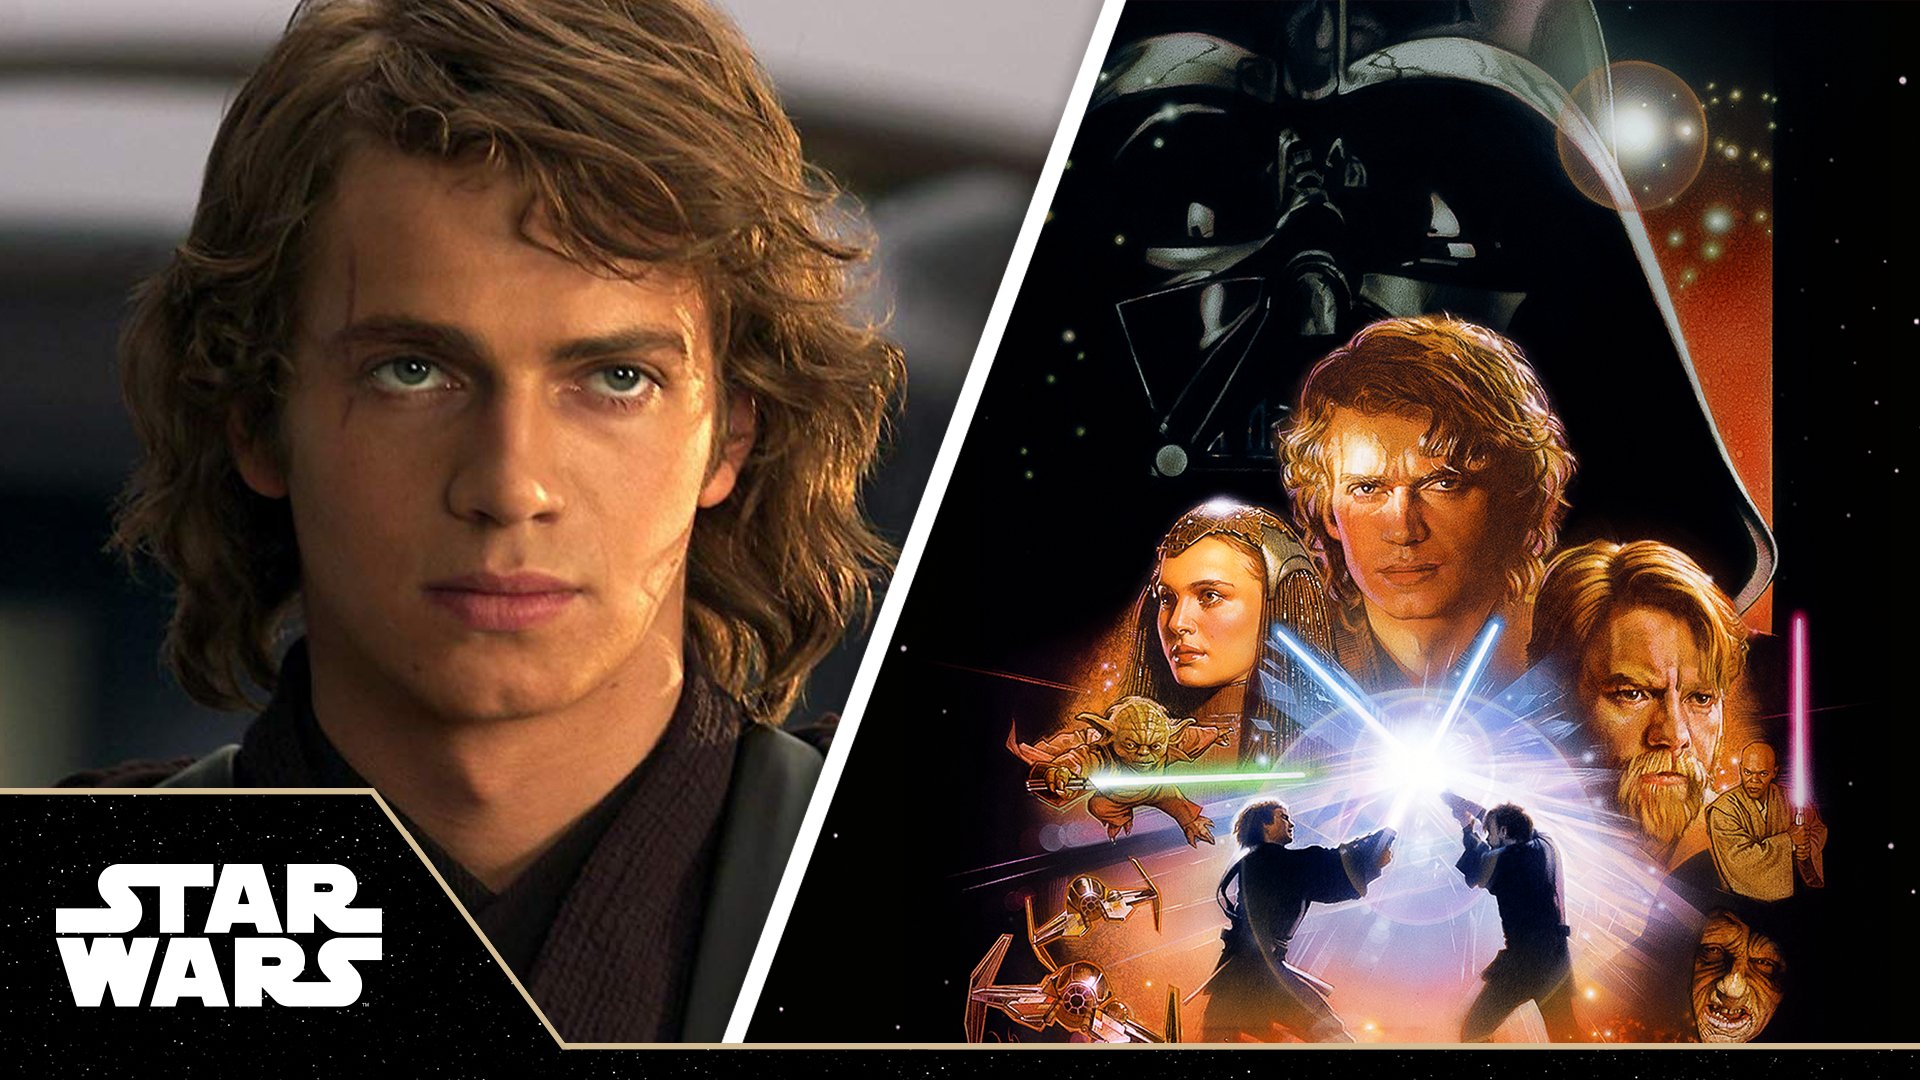 Star Wars Witness The Birth Of The Dark Lord Of The Sith With Anakin Skywalker S Journey In Revengeofthesith T Co Nbe03jro8f Twitter